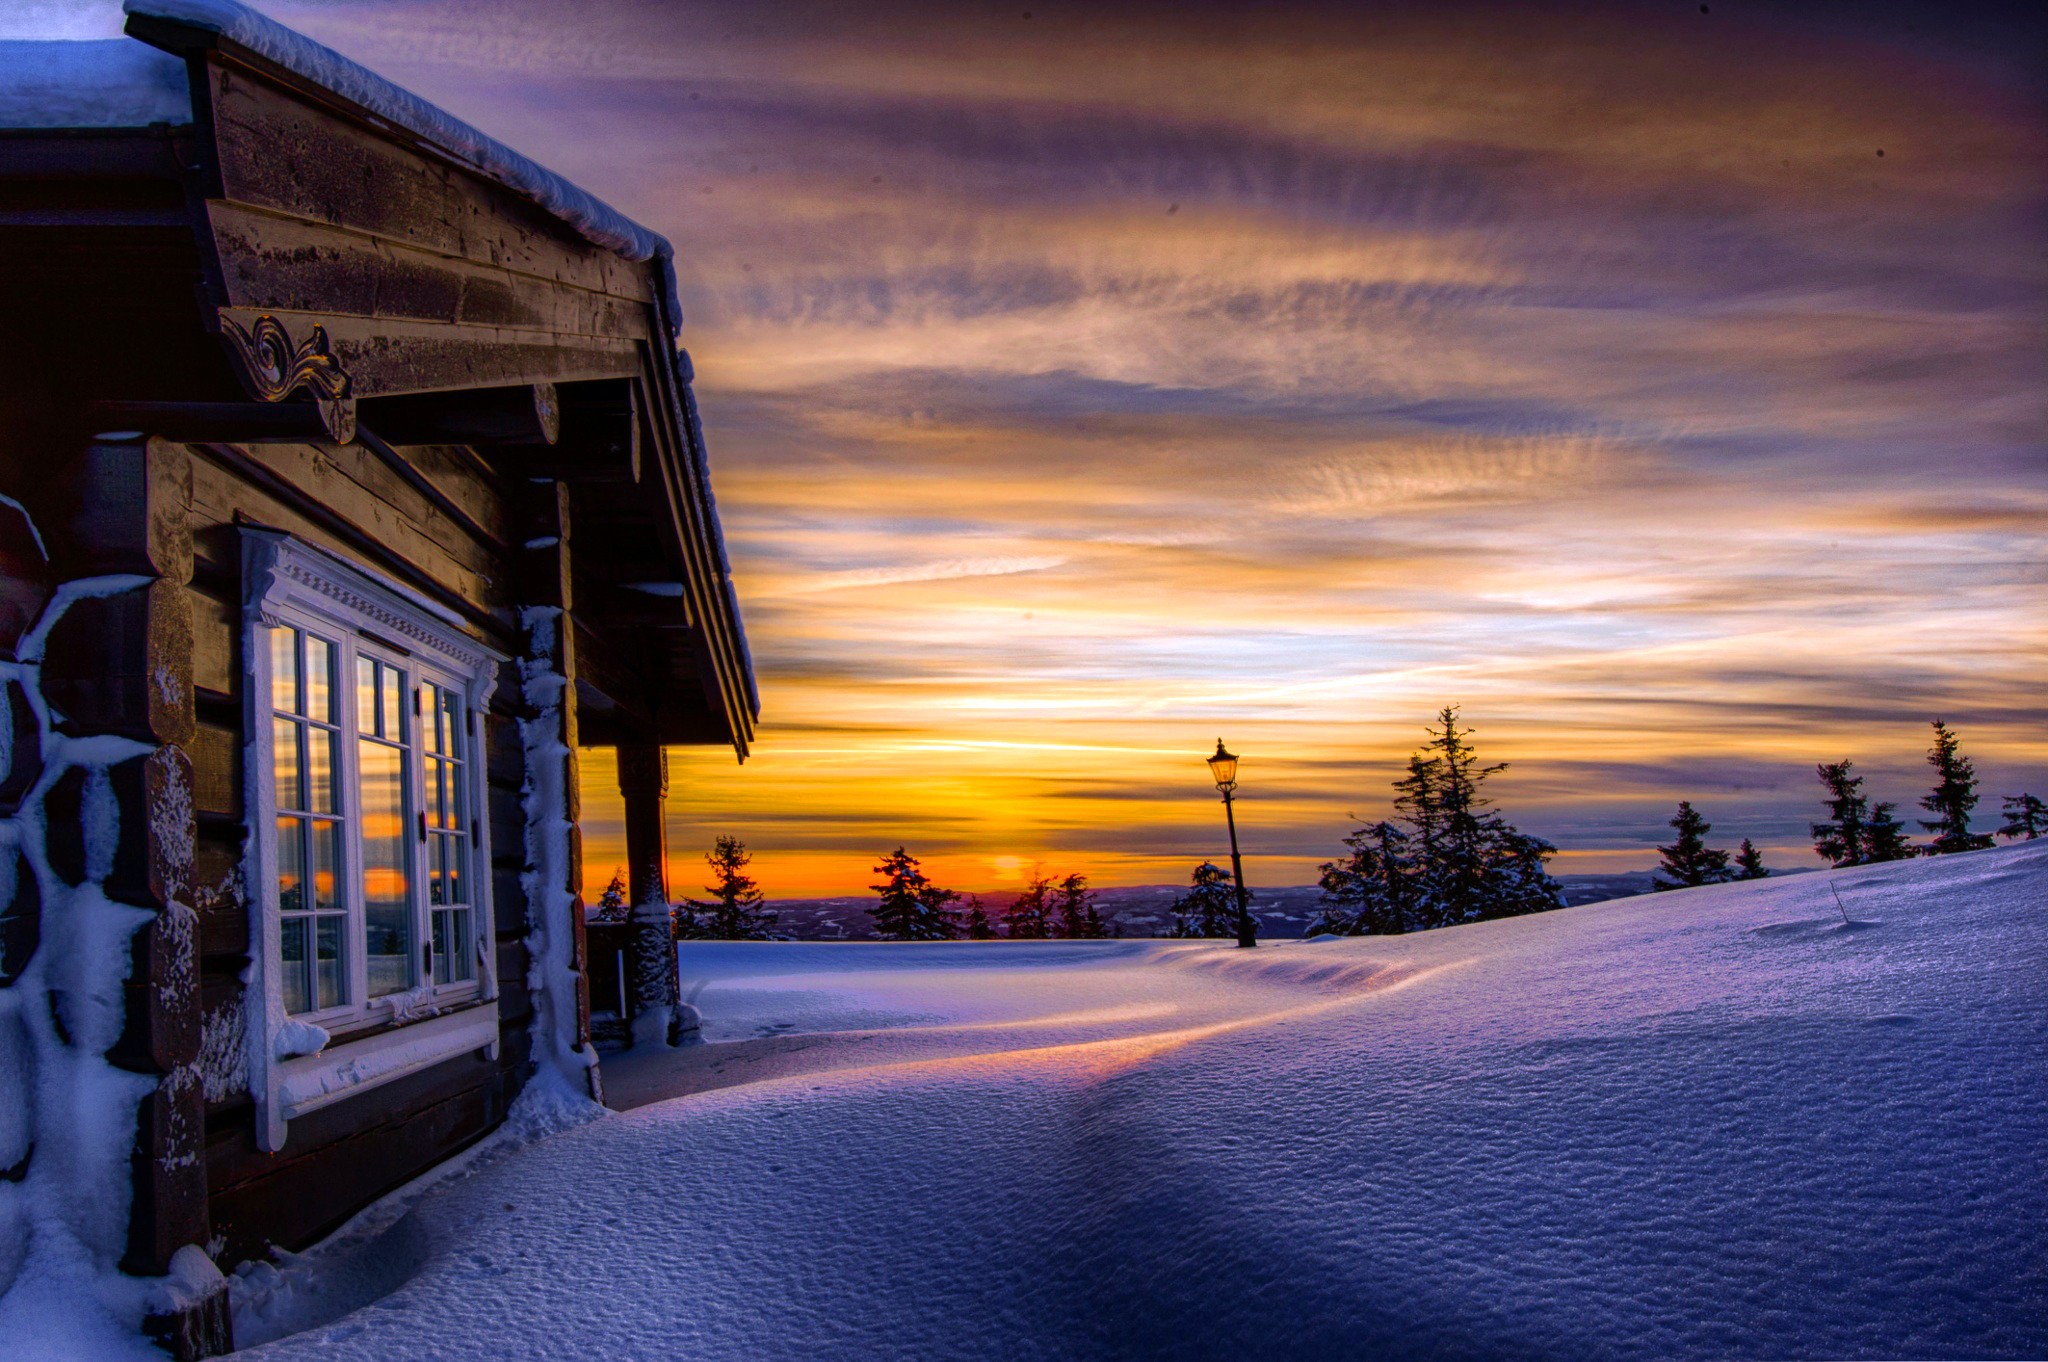 General 2048x1362 winter landscape sunset wood house snow cold ice sunlight outdoors